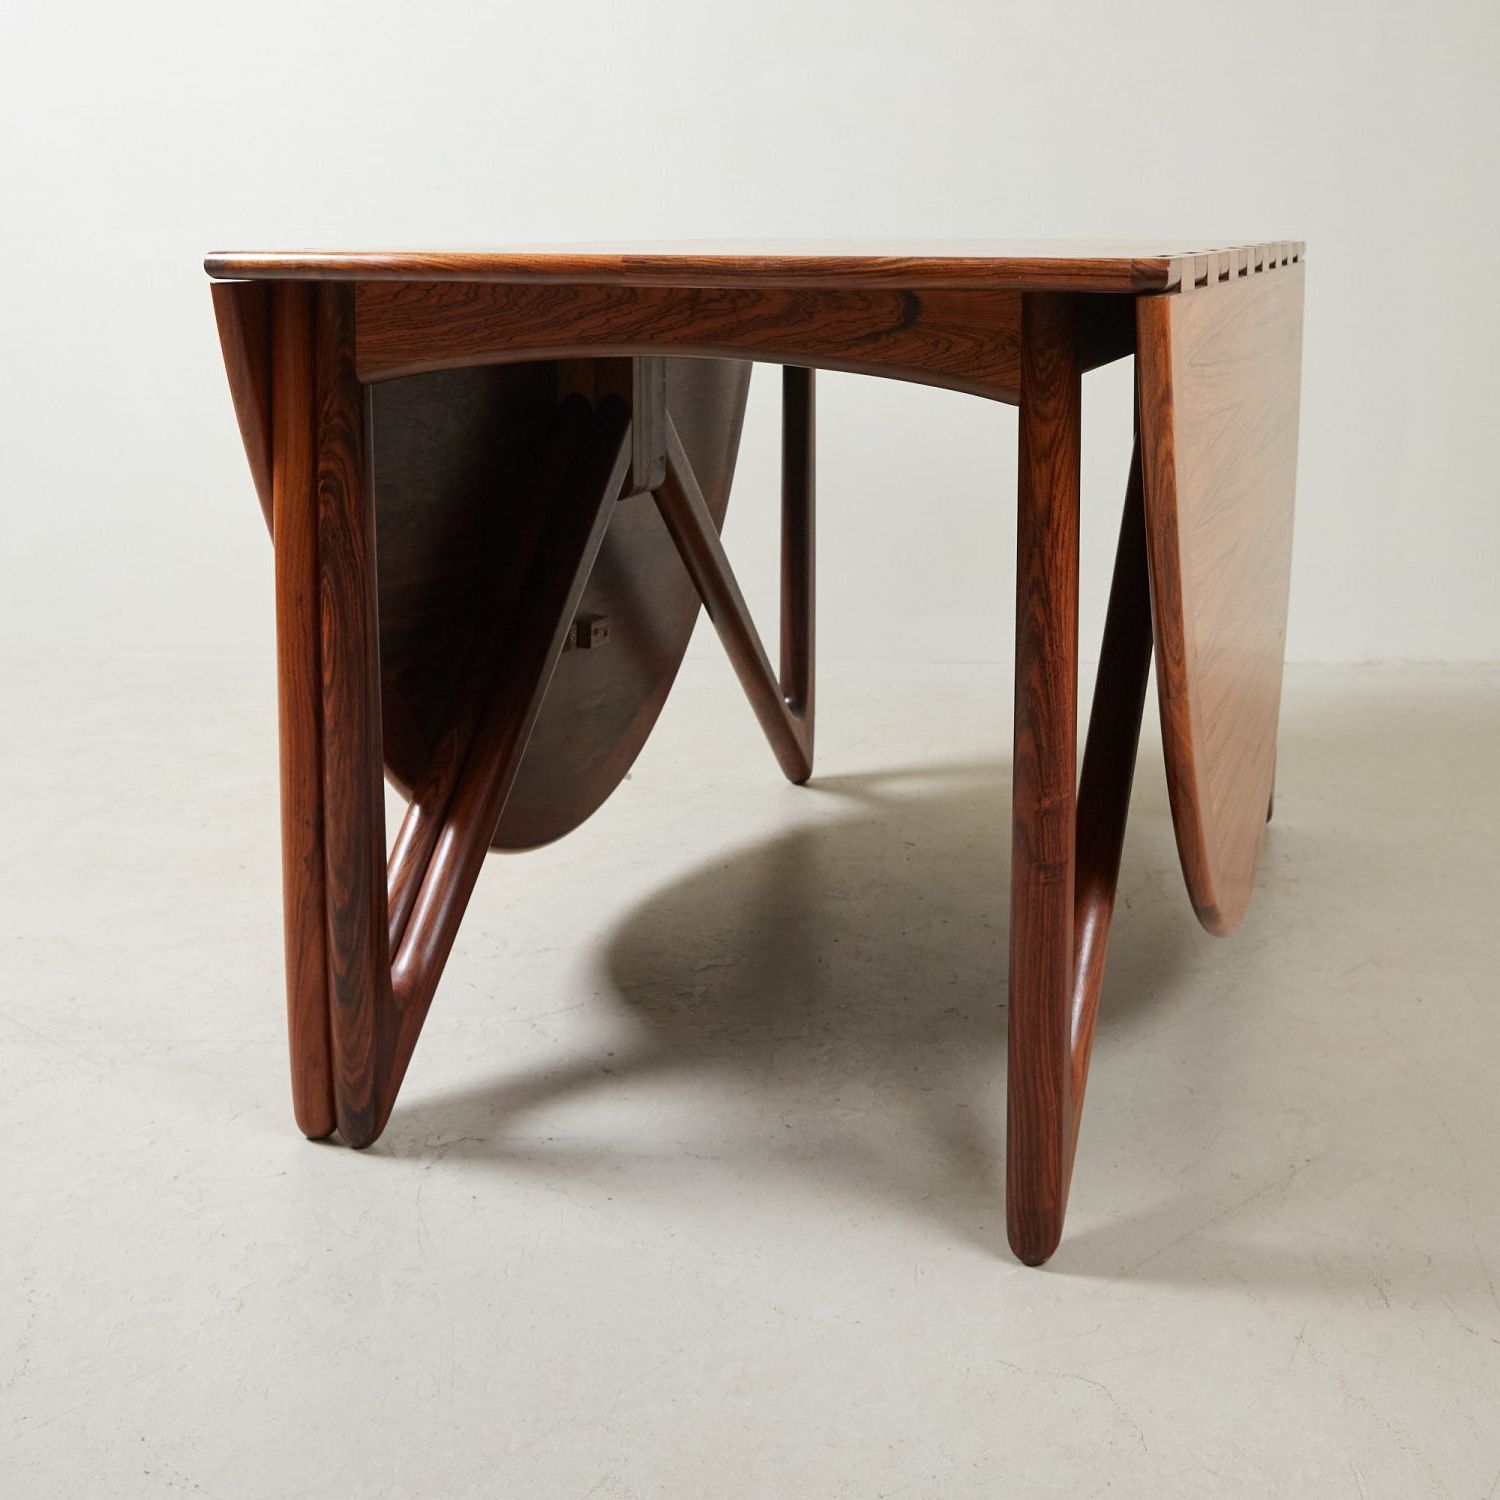 Drop Leaf Tables With Hairpin Legs With Regard To Fashionable Danish Drop Leaf Tablekurt Ostervig For Jason Mobler (View 6 of 15)